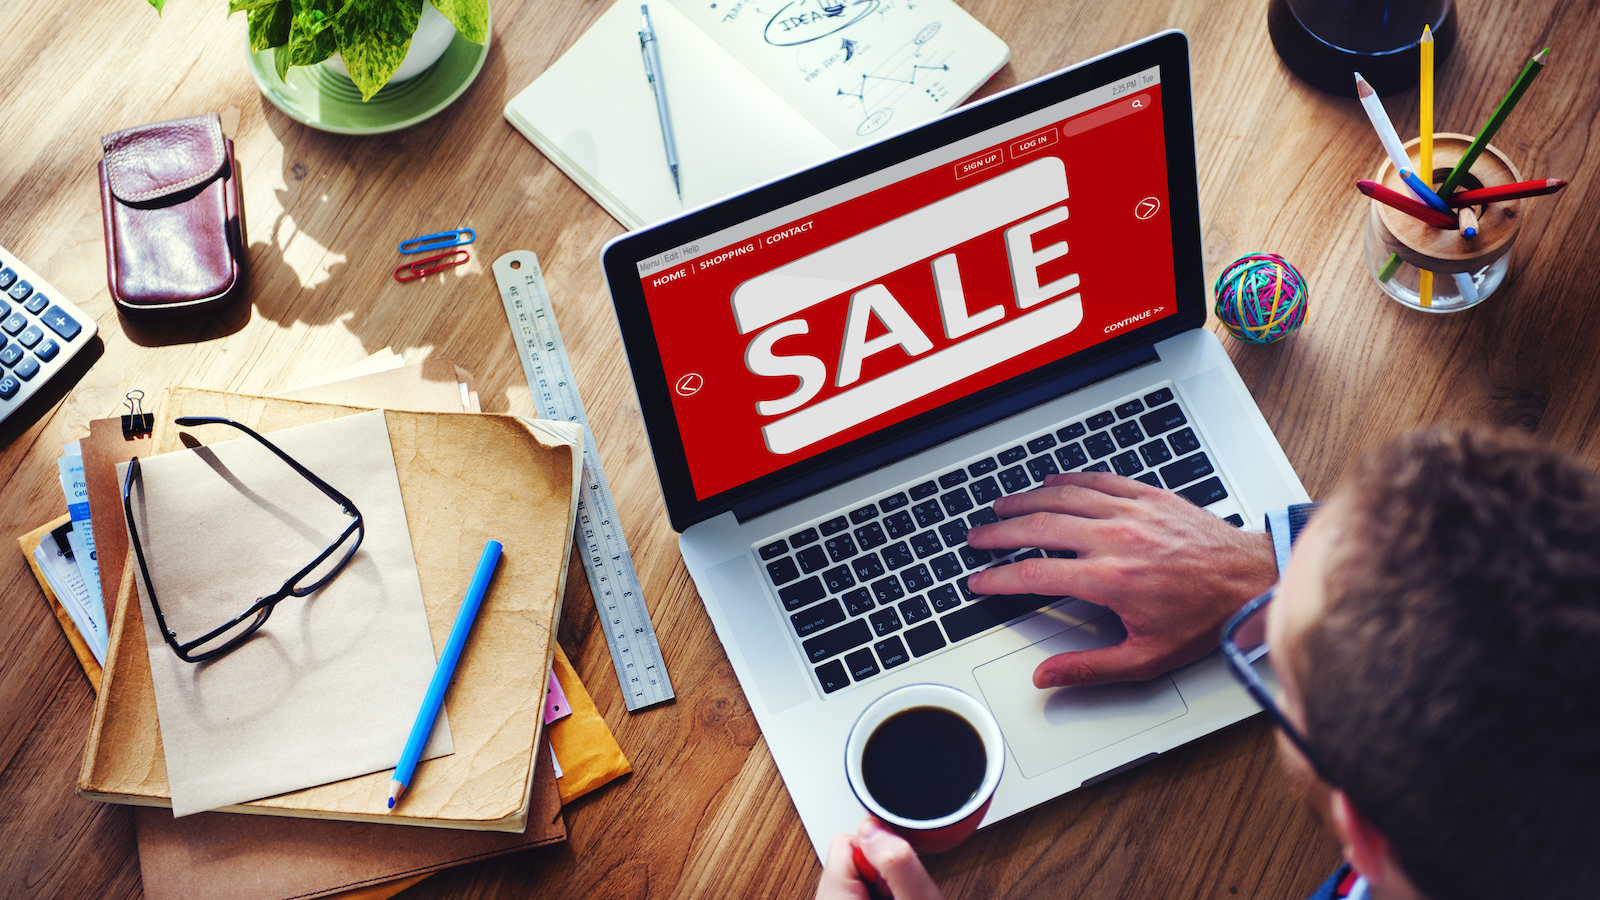 How to Launch a Successful Flash Sale: 7 Tips + Examples